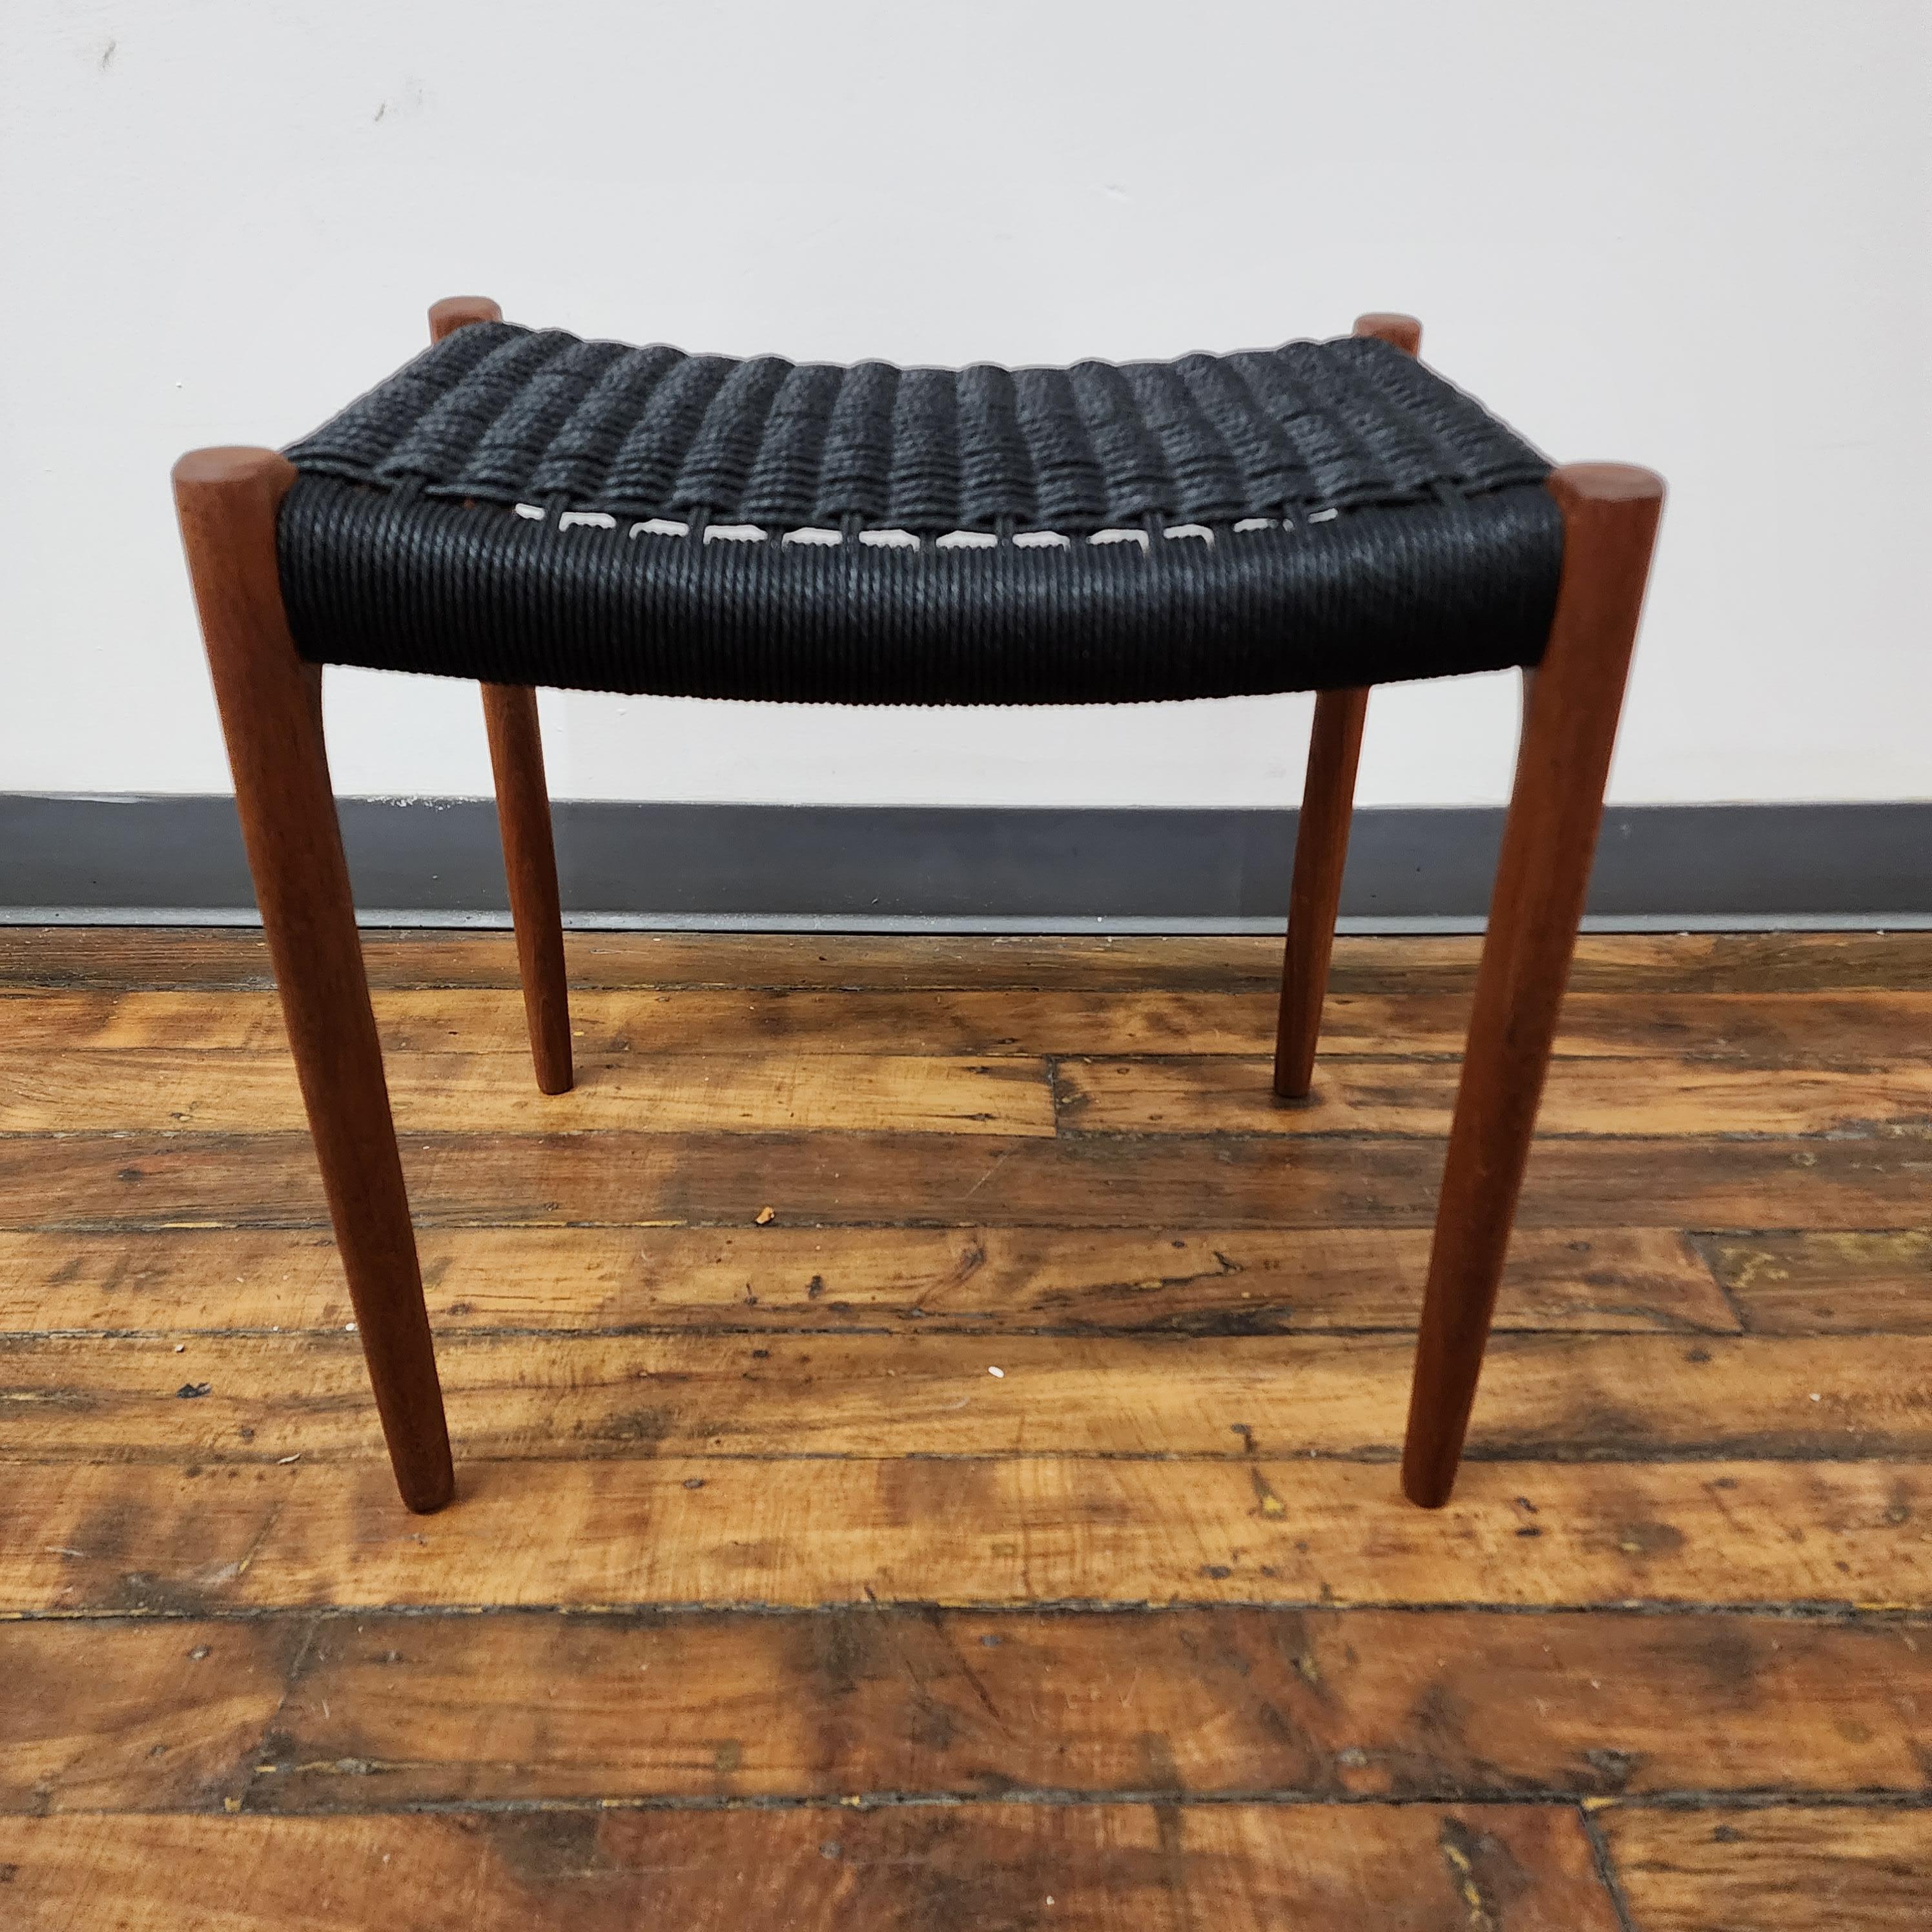 This refinished teak Moller 80A stool with black Danish cord is a stunning example of Scandinavian design at its finest. The teak wood has been expertly refinished to reveal its natural grain and warm, rich tones, creating a sense of organic warmth